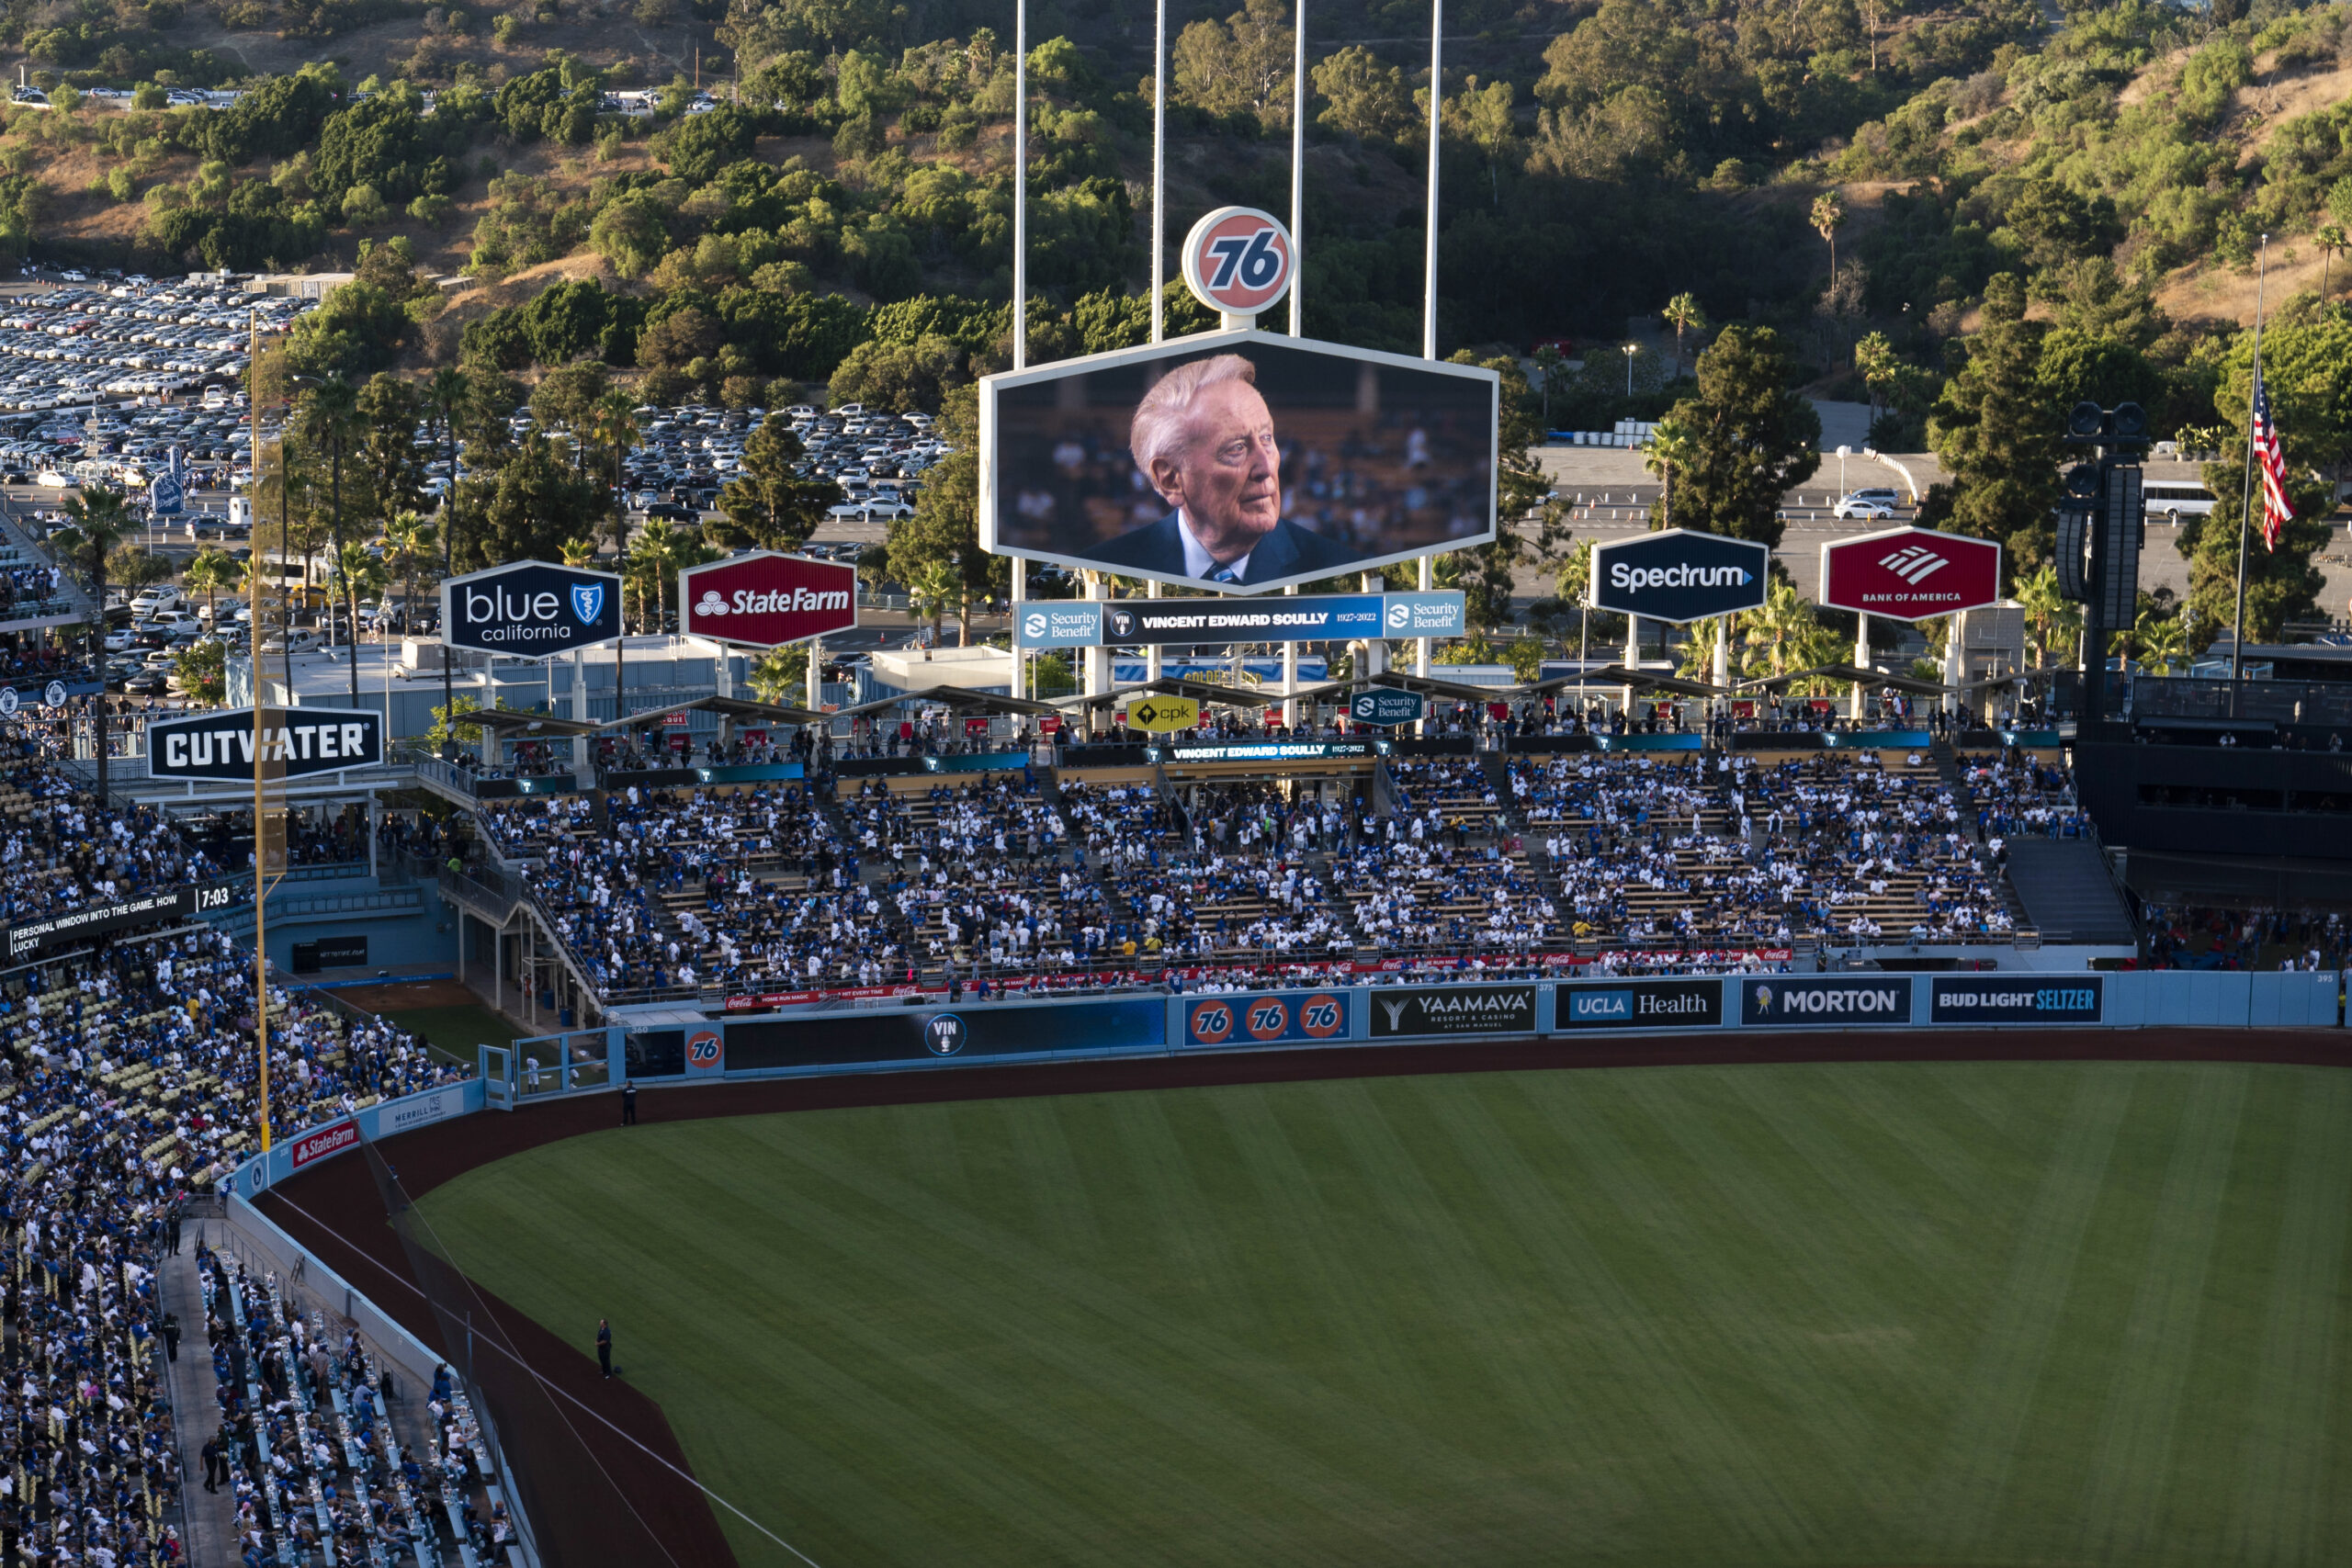 A screen at Dodger Stadium shows late broadcaster Vin Scully during a tribute to him before a baseball game between the Los Angeles Dodgers and the San Diego Padres on Friday, Aug. 5, 2022, in Los Angeles. (AP Photo/Jae C. Hong)